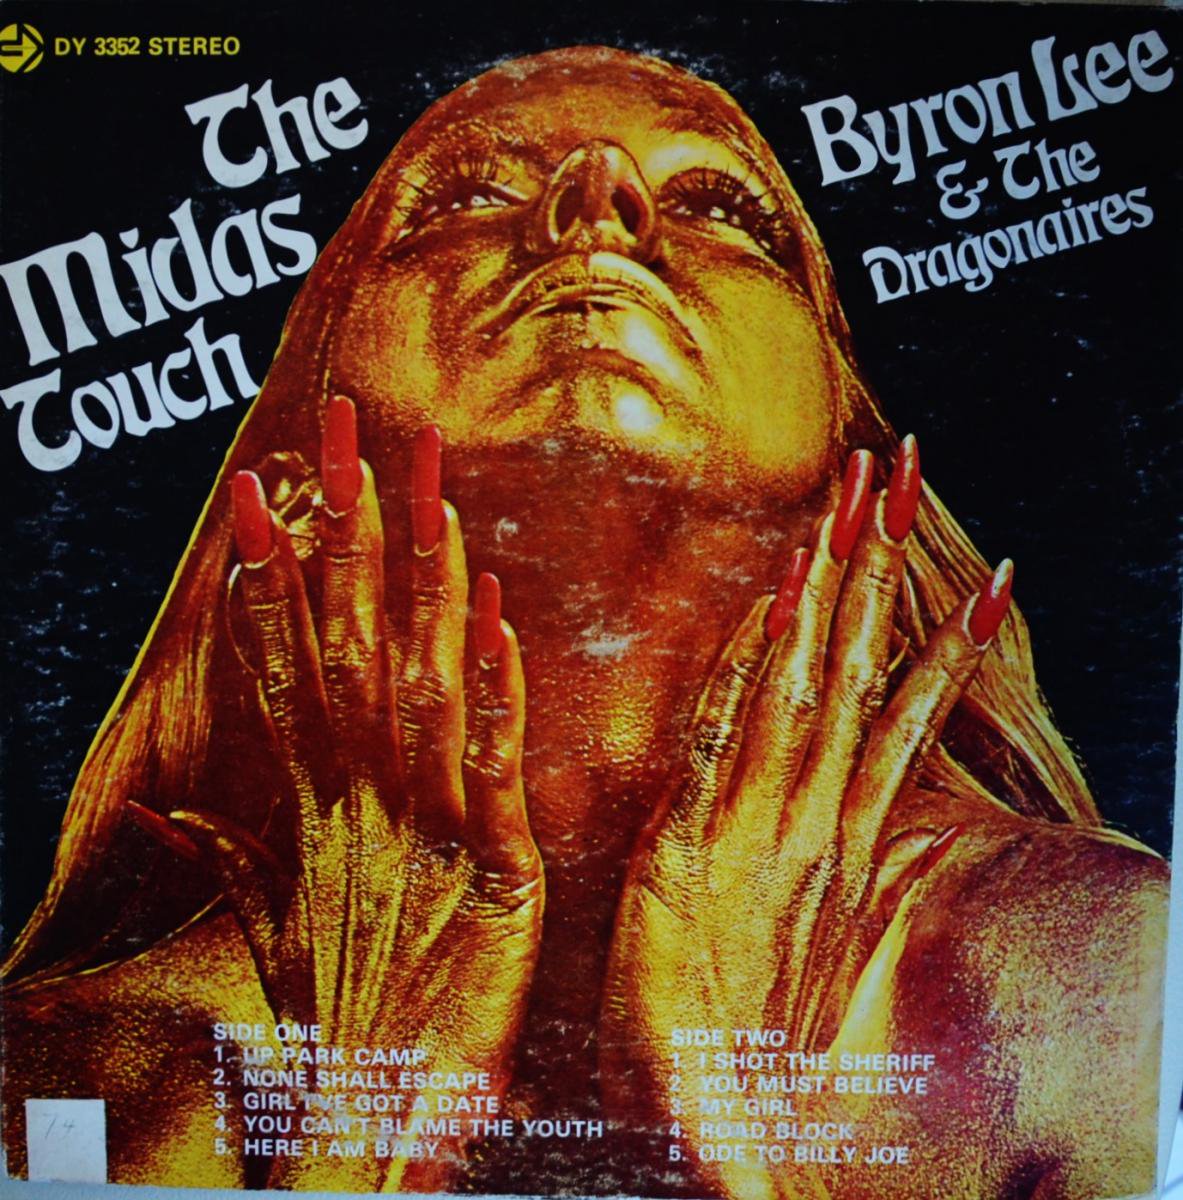 BYRON LEE AND THE DRAGONAIRES / THE MIDAS TOUCH (LP)